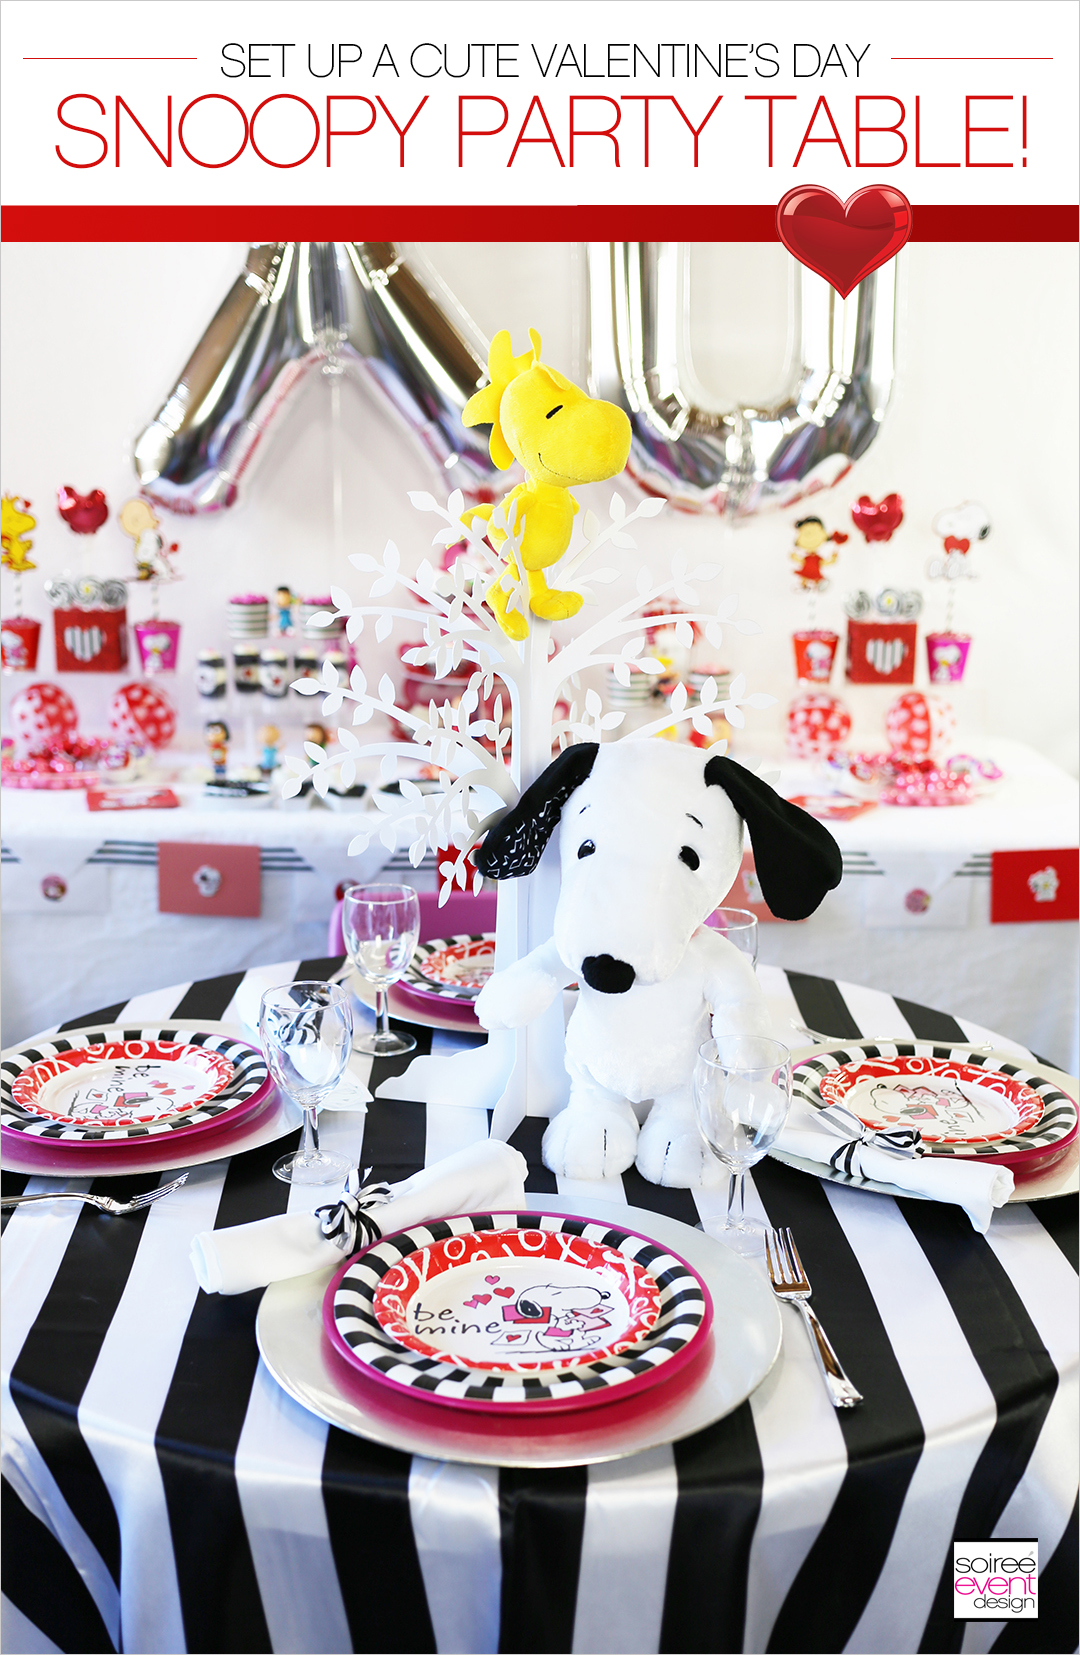 Peanuts Valentines Day Party, Snoopy Party Table